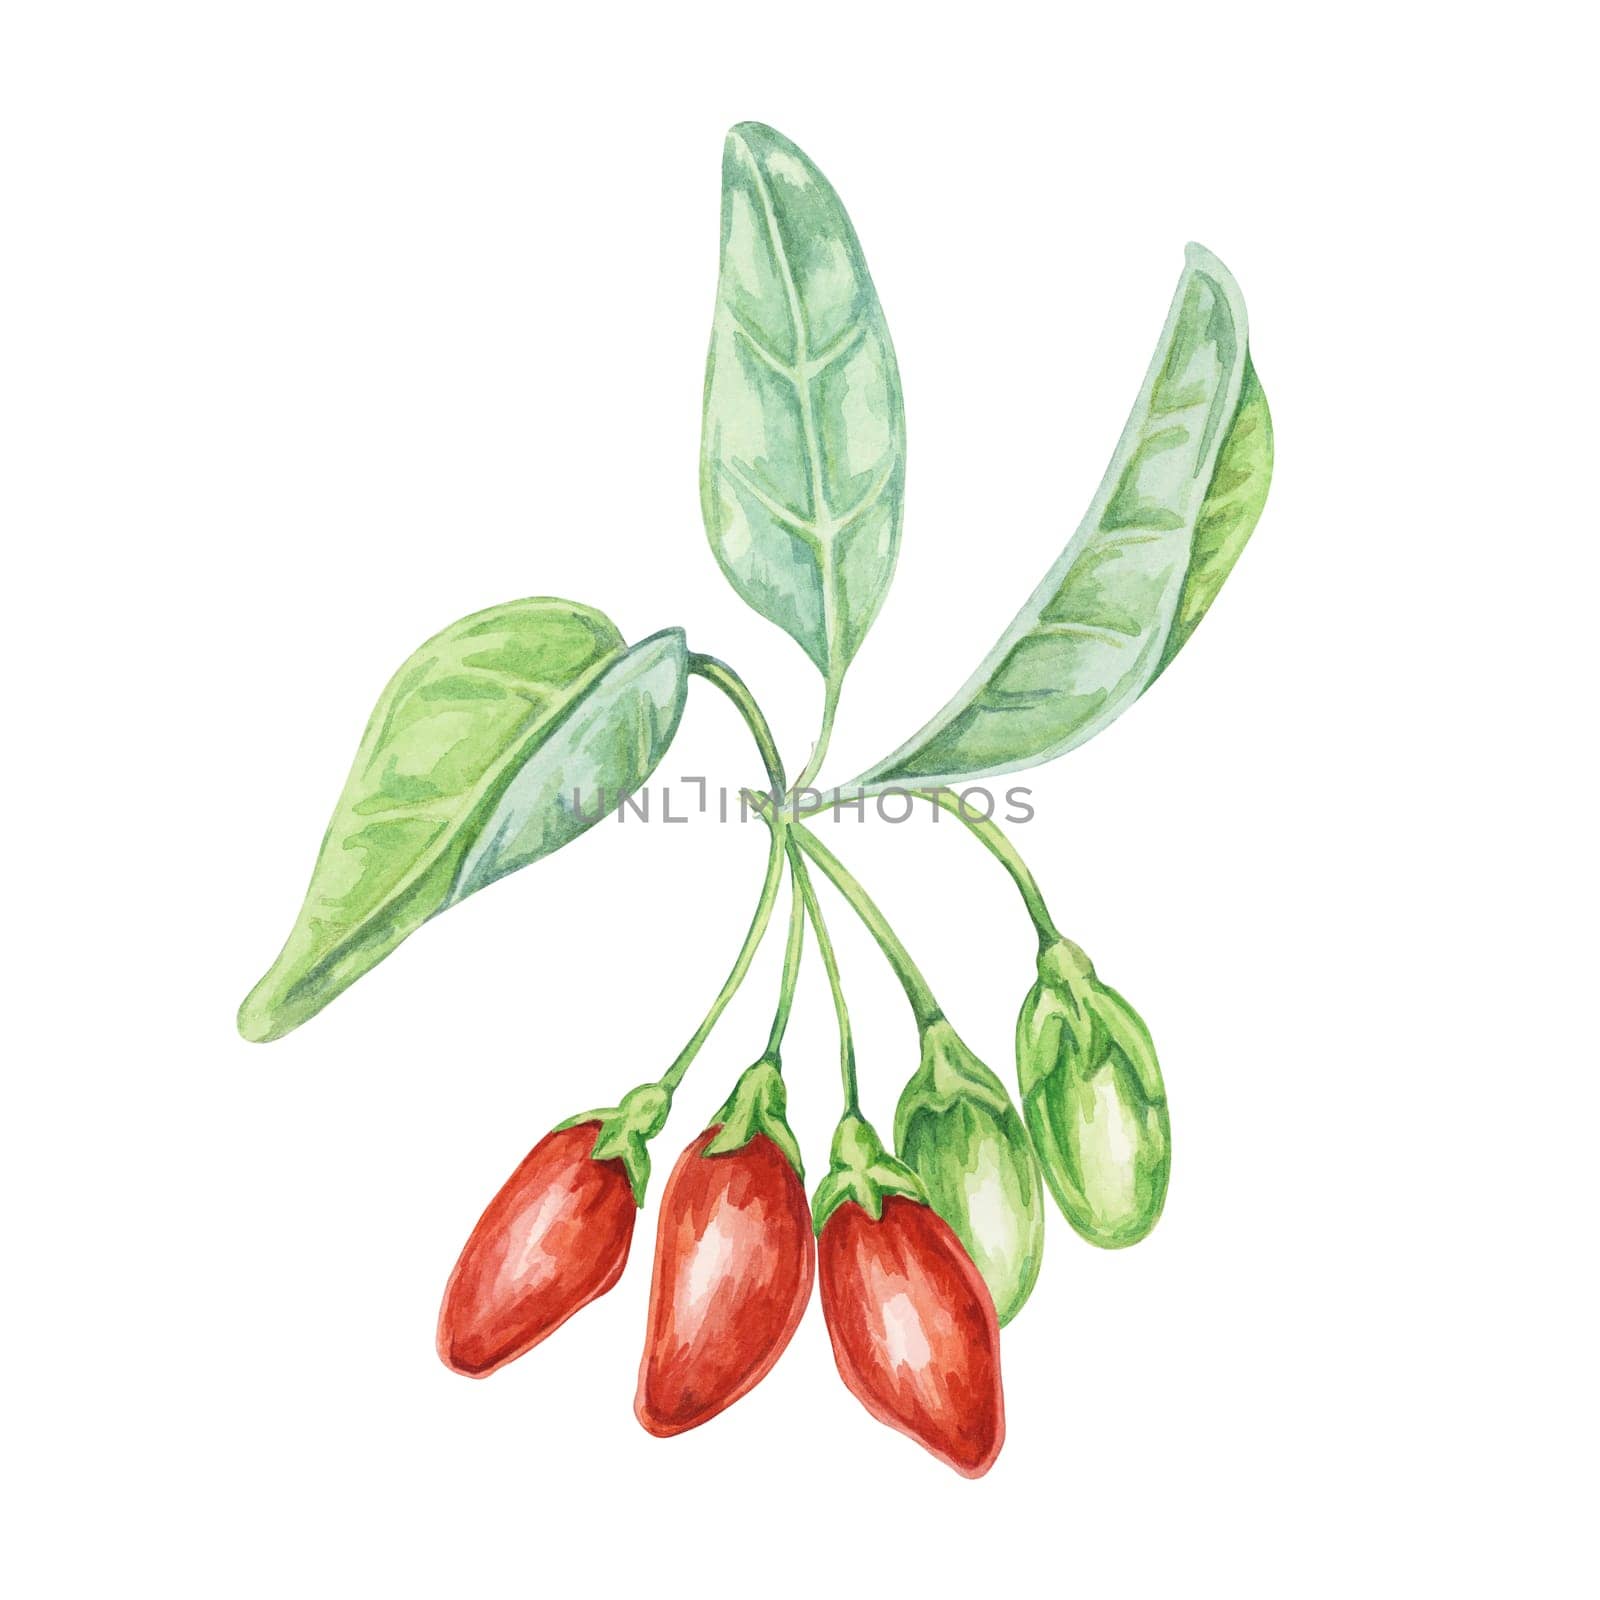 Several goji berries on the branch with leaves in watercolor isolated on white background. Hand-drawn clipart of licium barbarum fruits, leaves. Design for printing, packaging, cards, posters